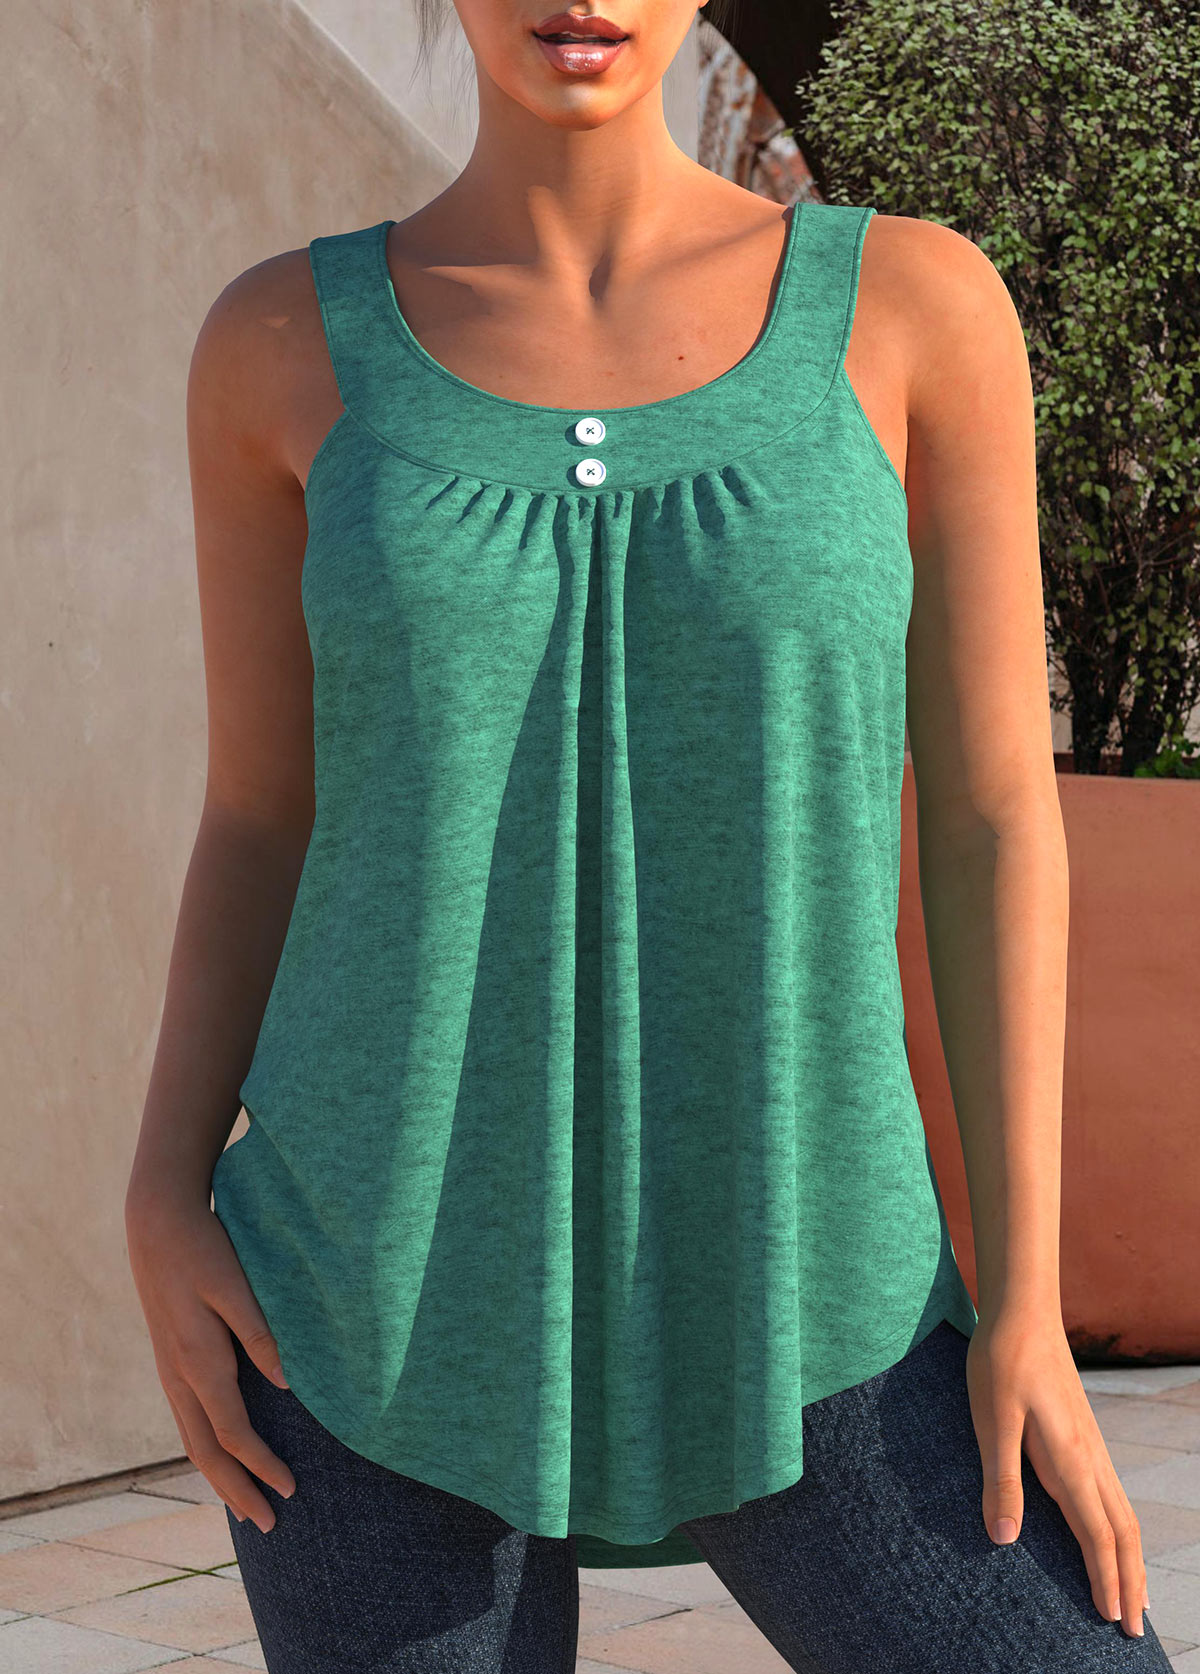 Decorative Button Wide Strap Turquoise Tank Top